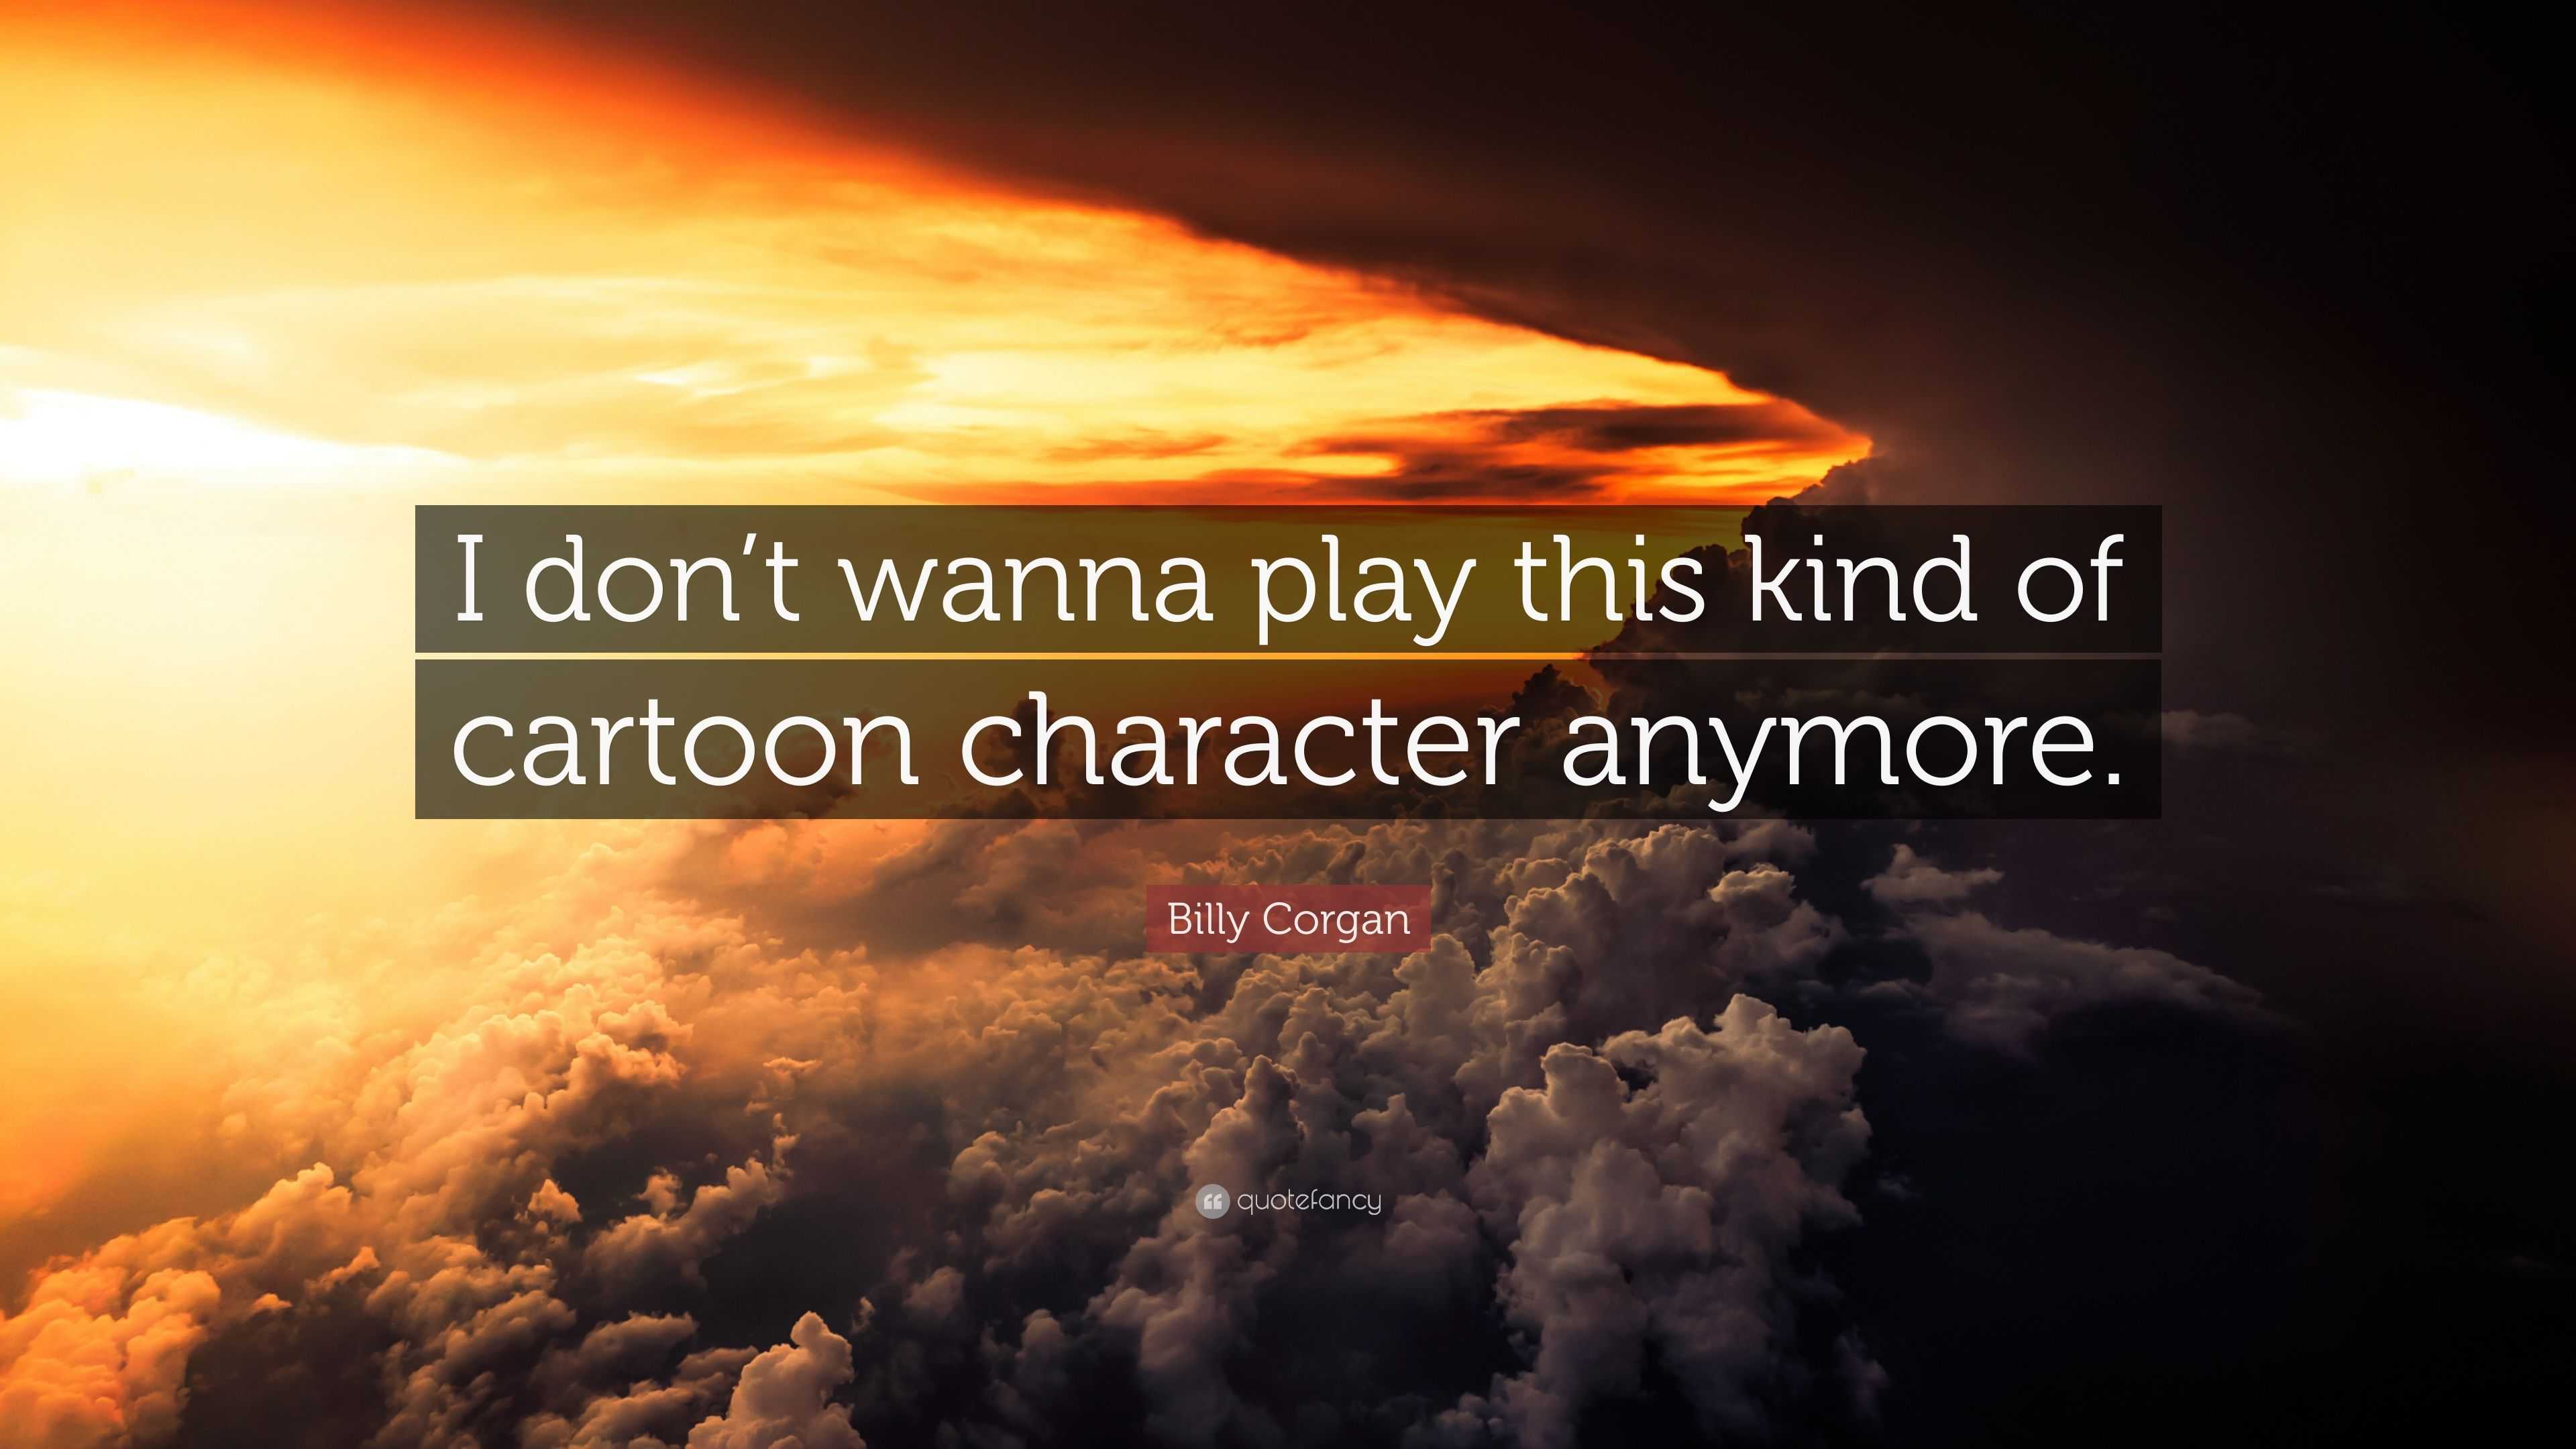 Billy Corgan Quote: “I don't wanna play this kind of cartoon character  anymore.”